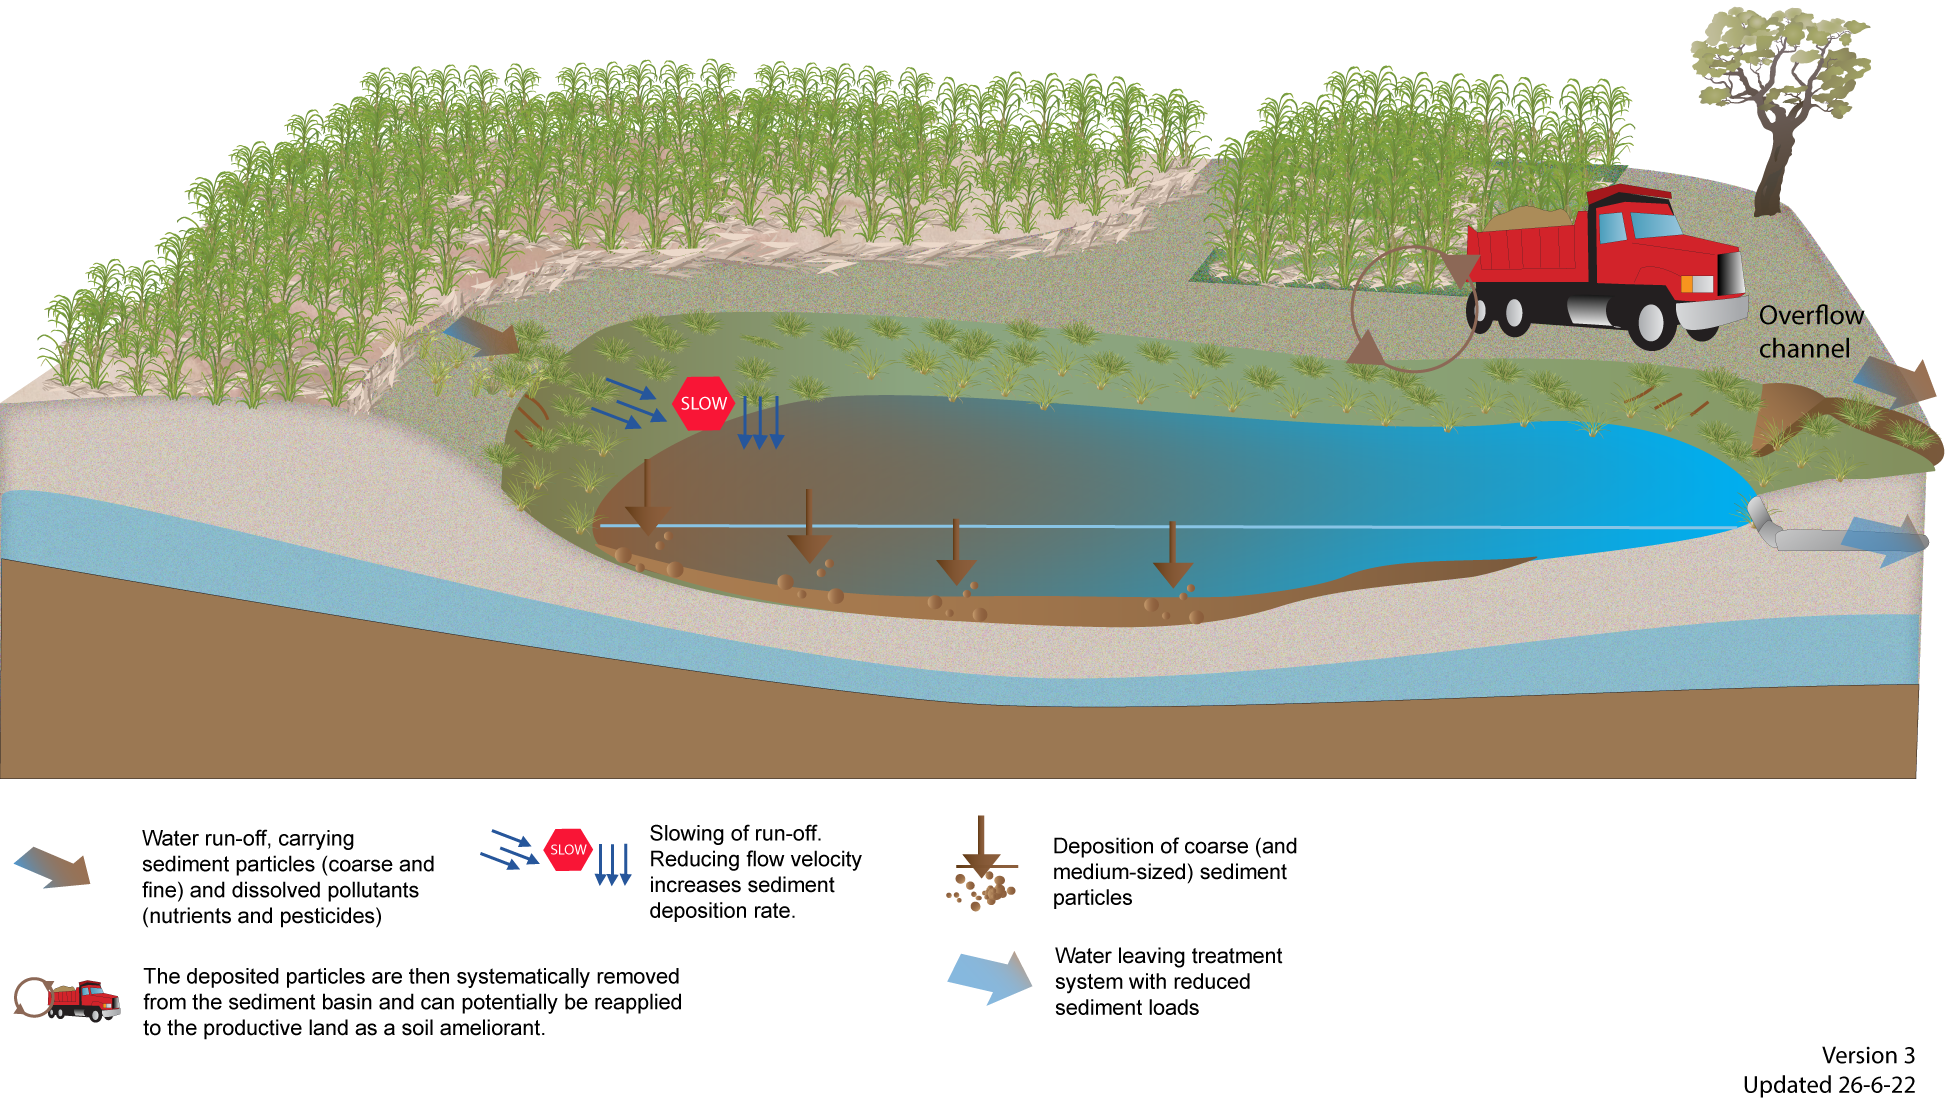 Purposes of reference conditions illustrated in a river basin